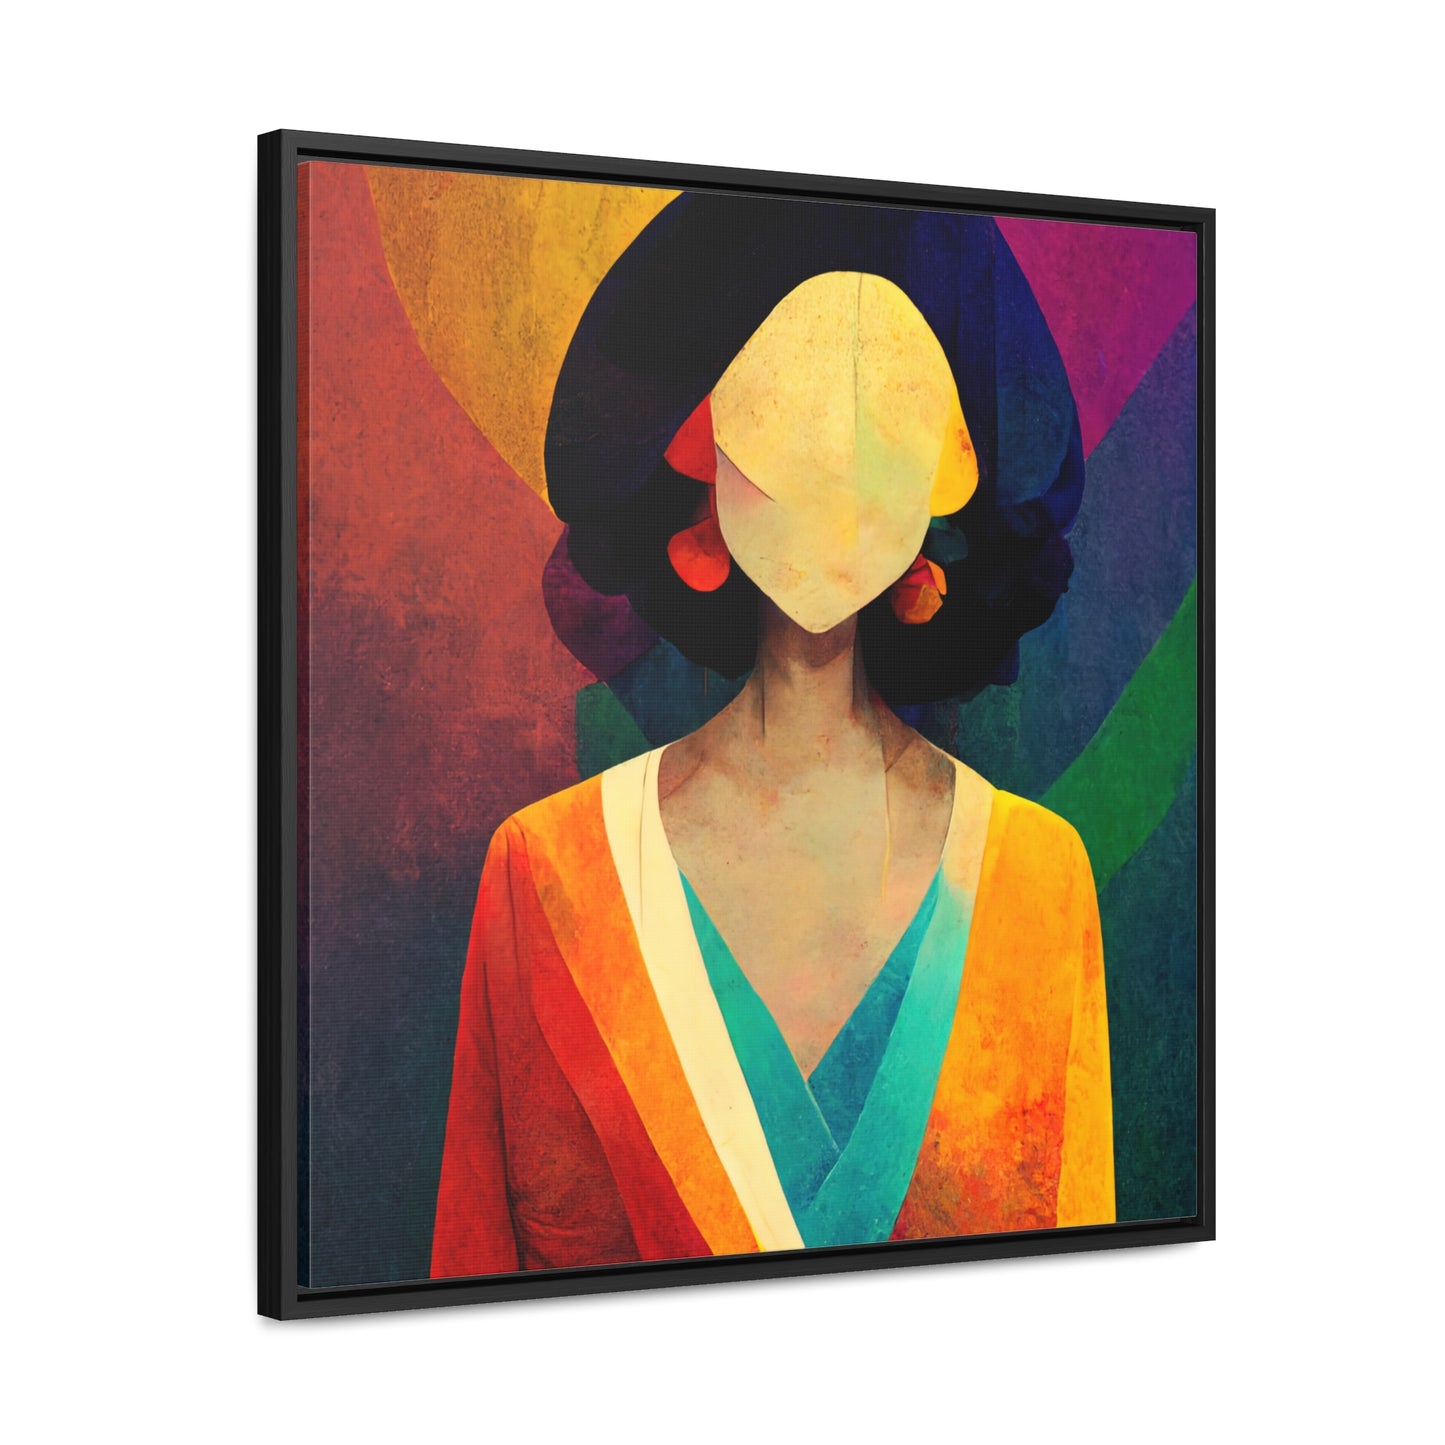 Lady's faces, Valentinii, Gallery Canvas Wraps, Square Frame